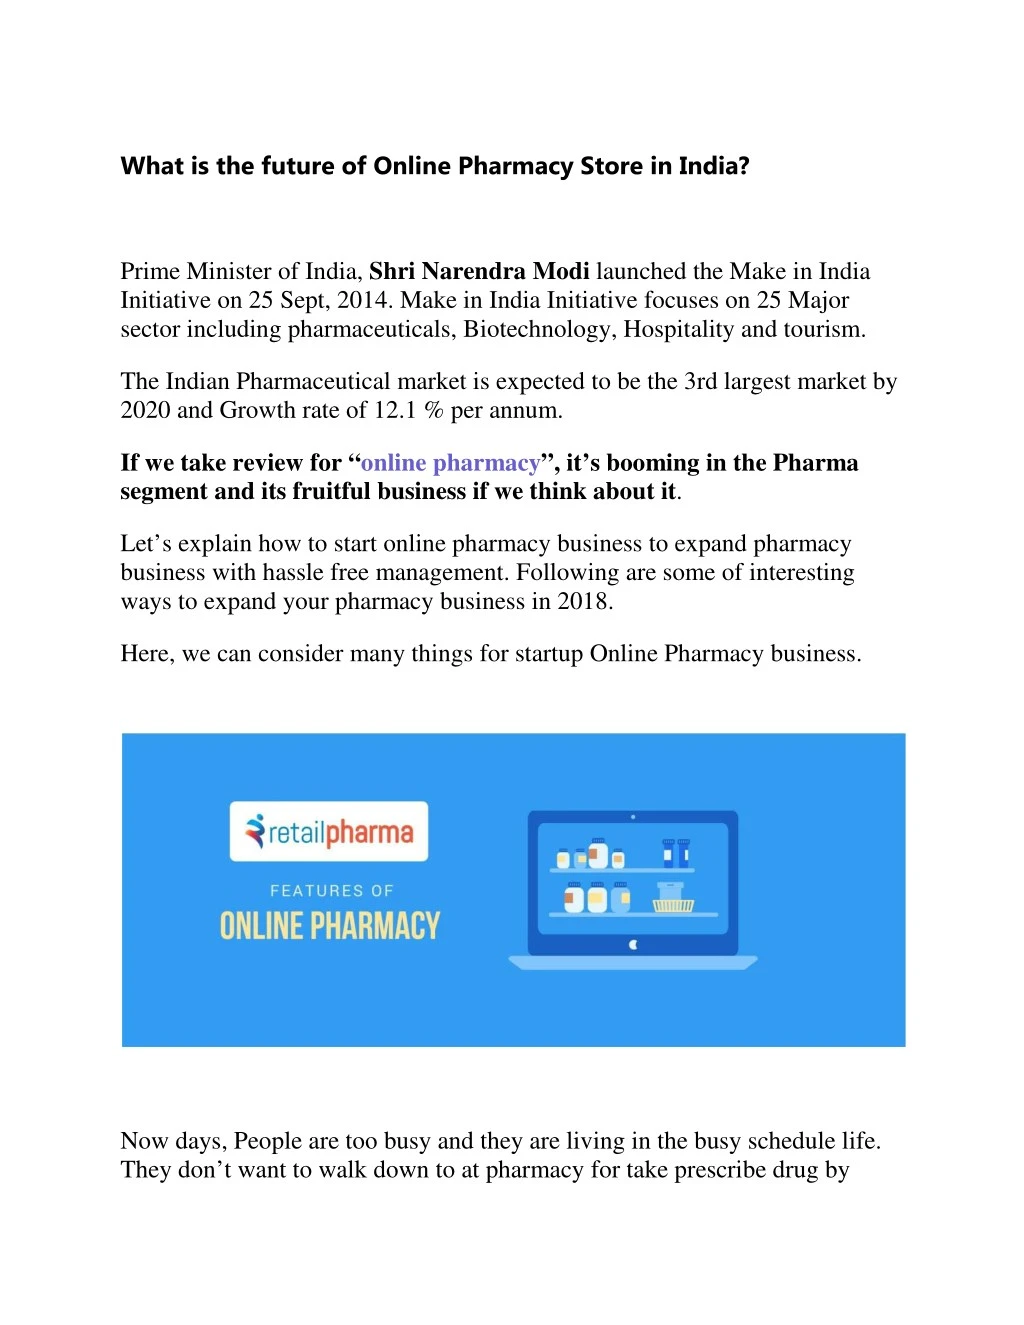 what is the future of online pharmacy store